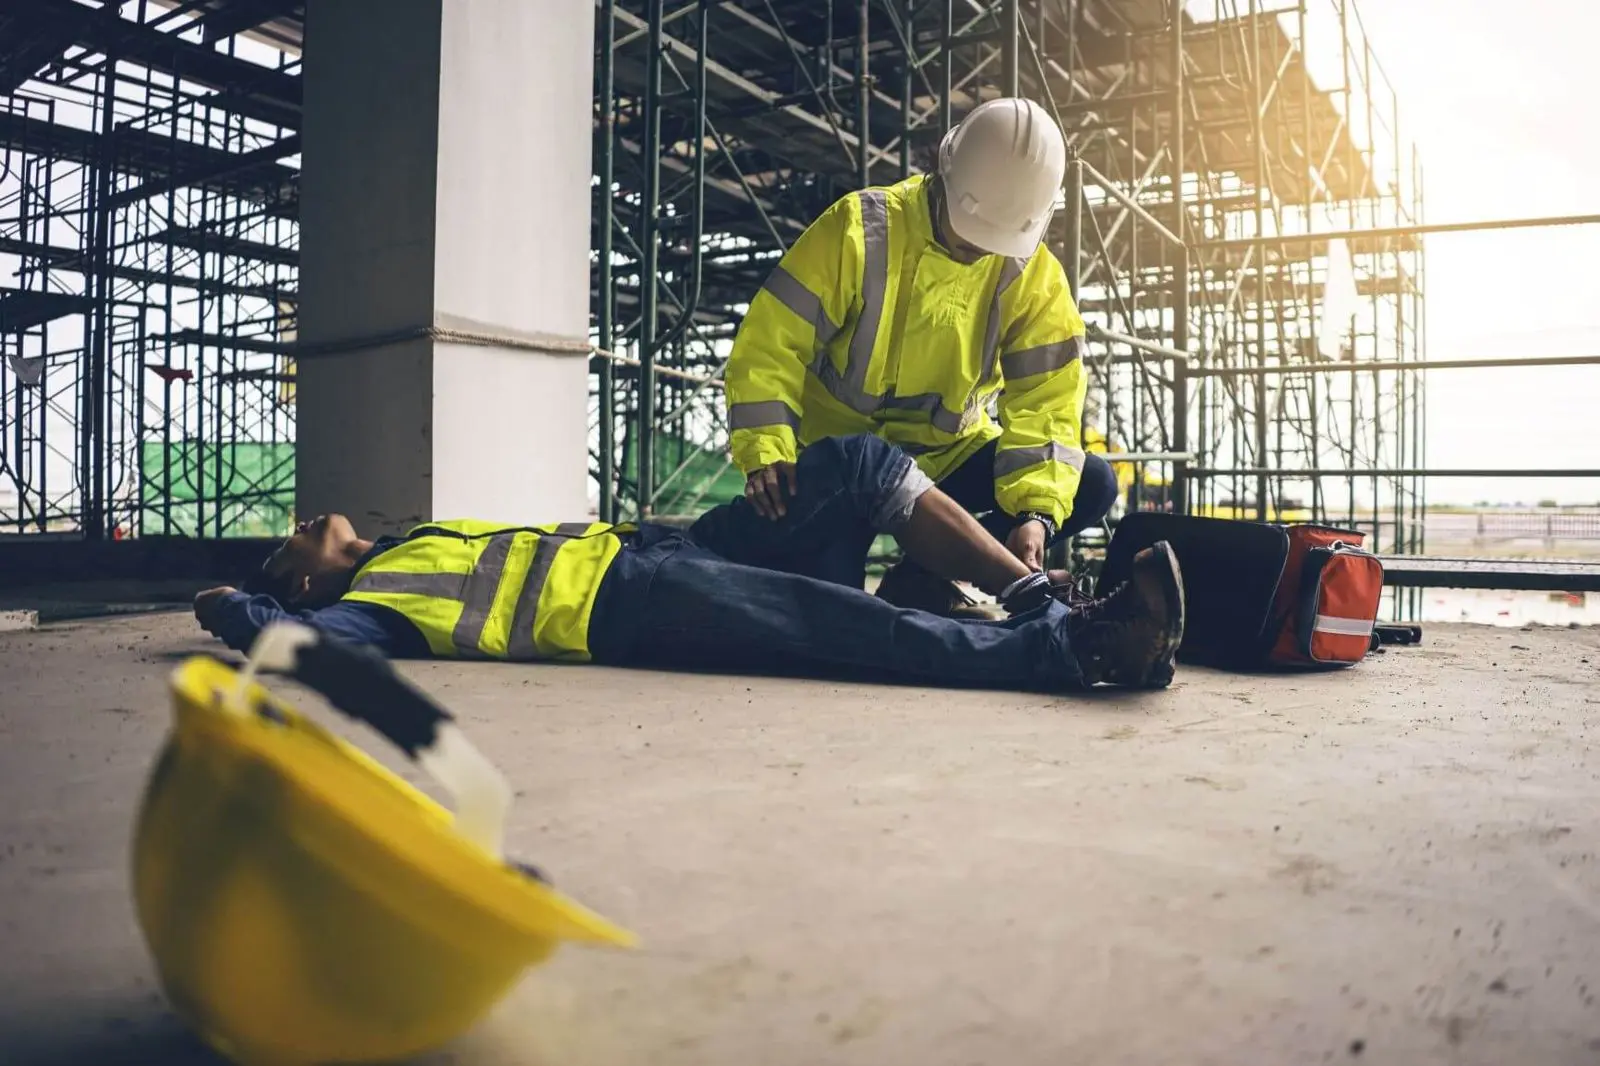 Top 3 Causes of Workplace Accidents